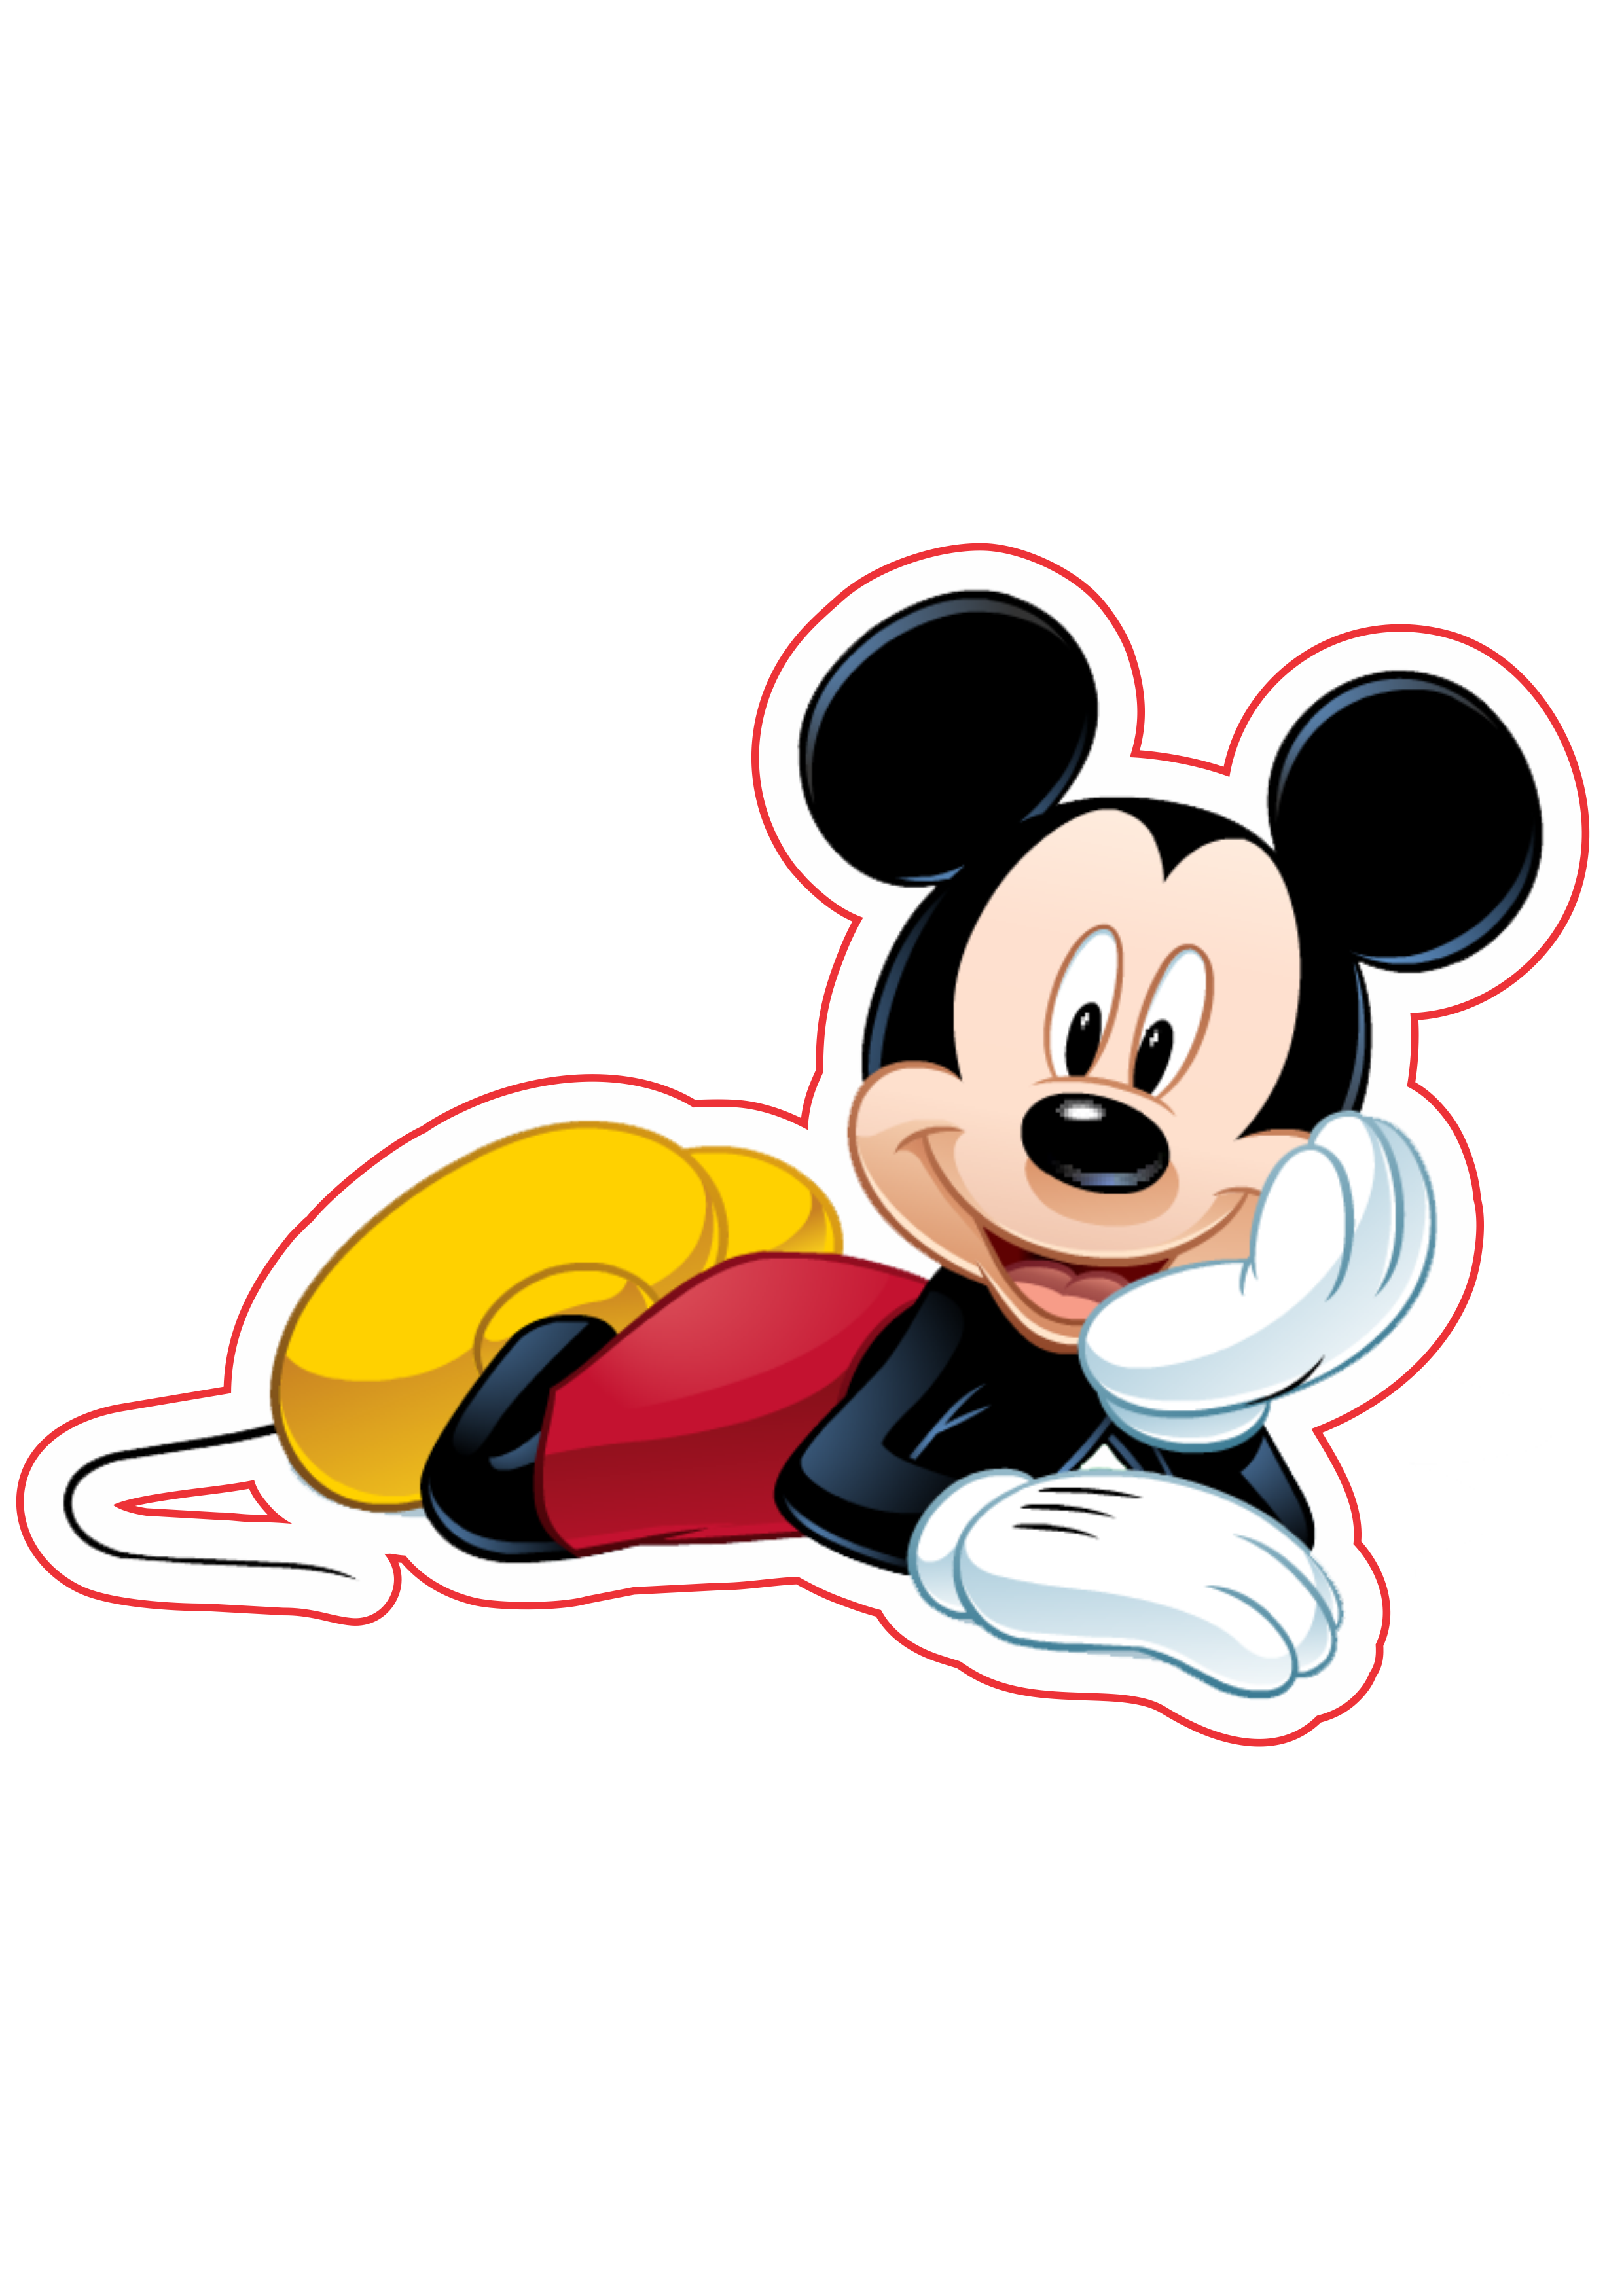 Mickey Mouse fundo transparente clipart png